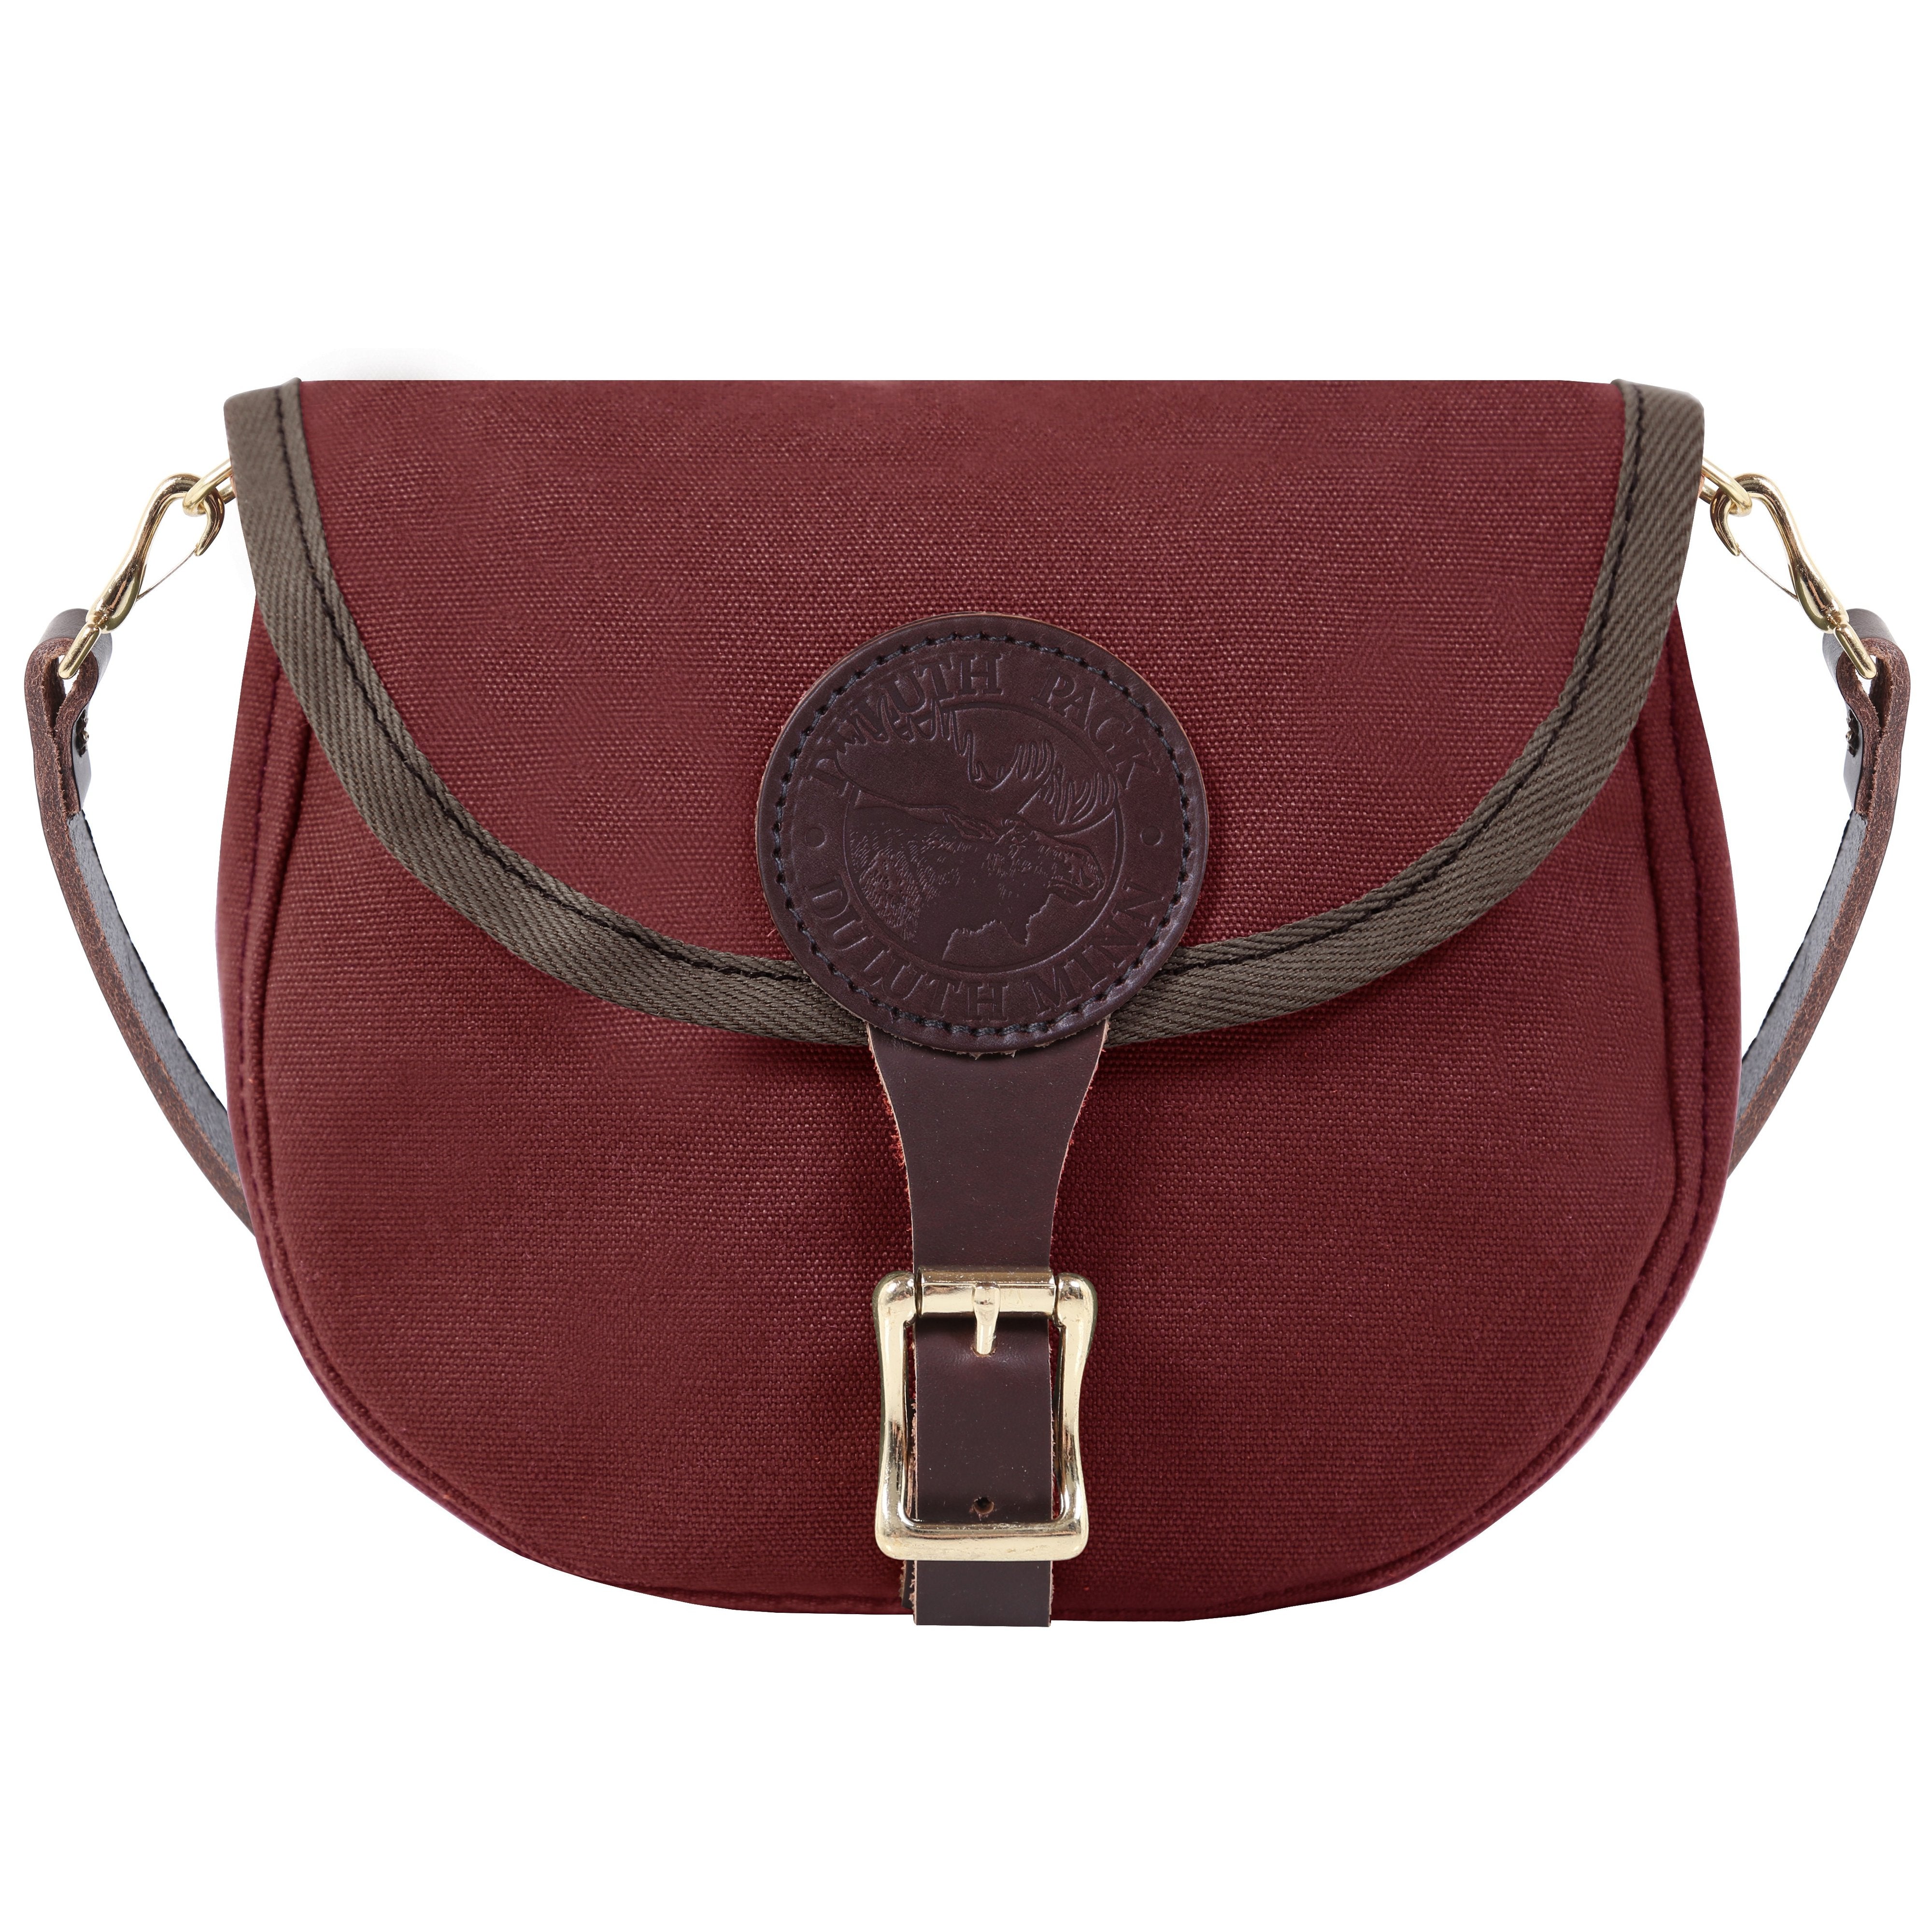 Burgundy suede leather bag . Cross body / shoulder bag in GENUINE leat –  Handmade suede bags by Good Times Barcelona